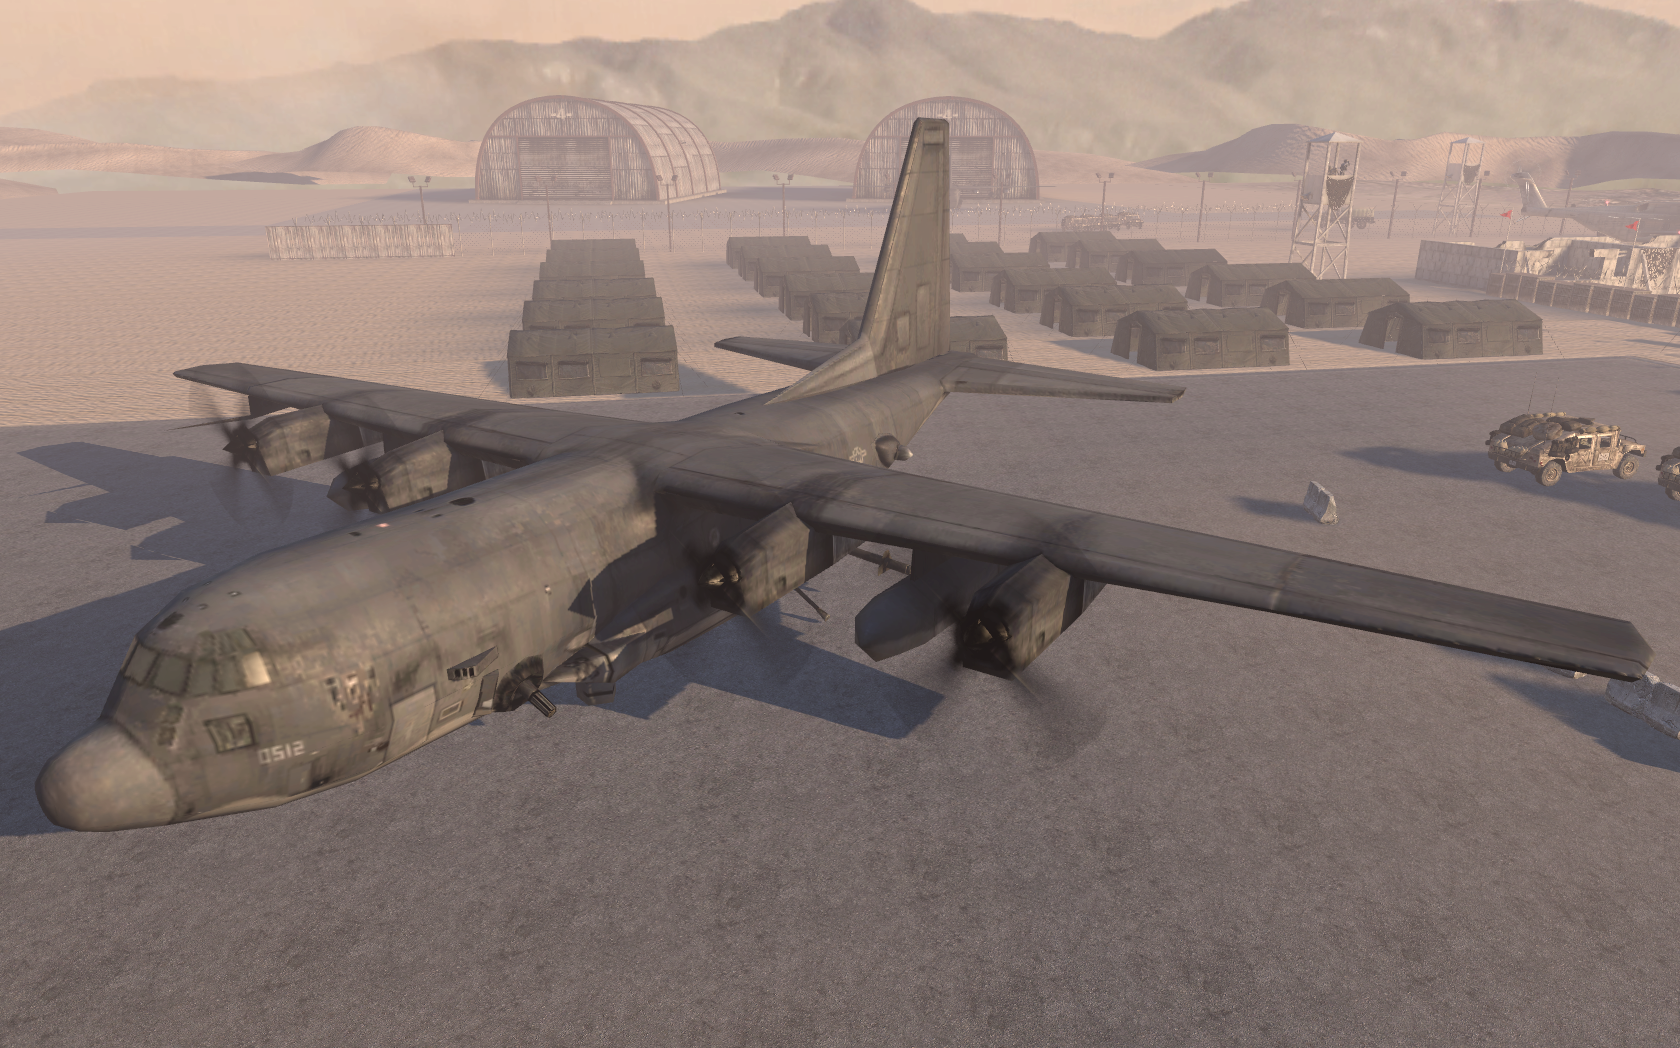 This ac130 wasn't FLYABLE but players could use its cannons without se...